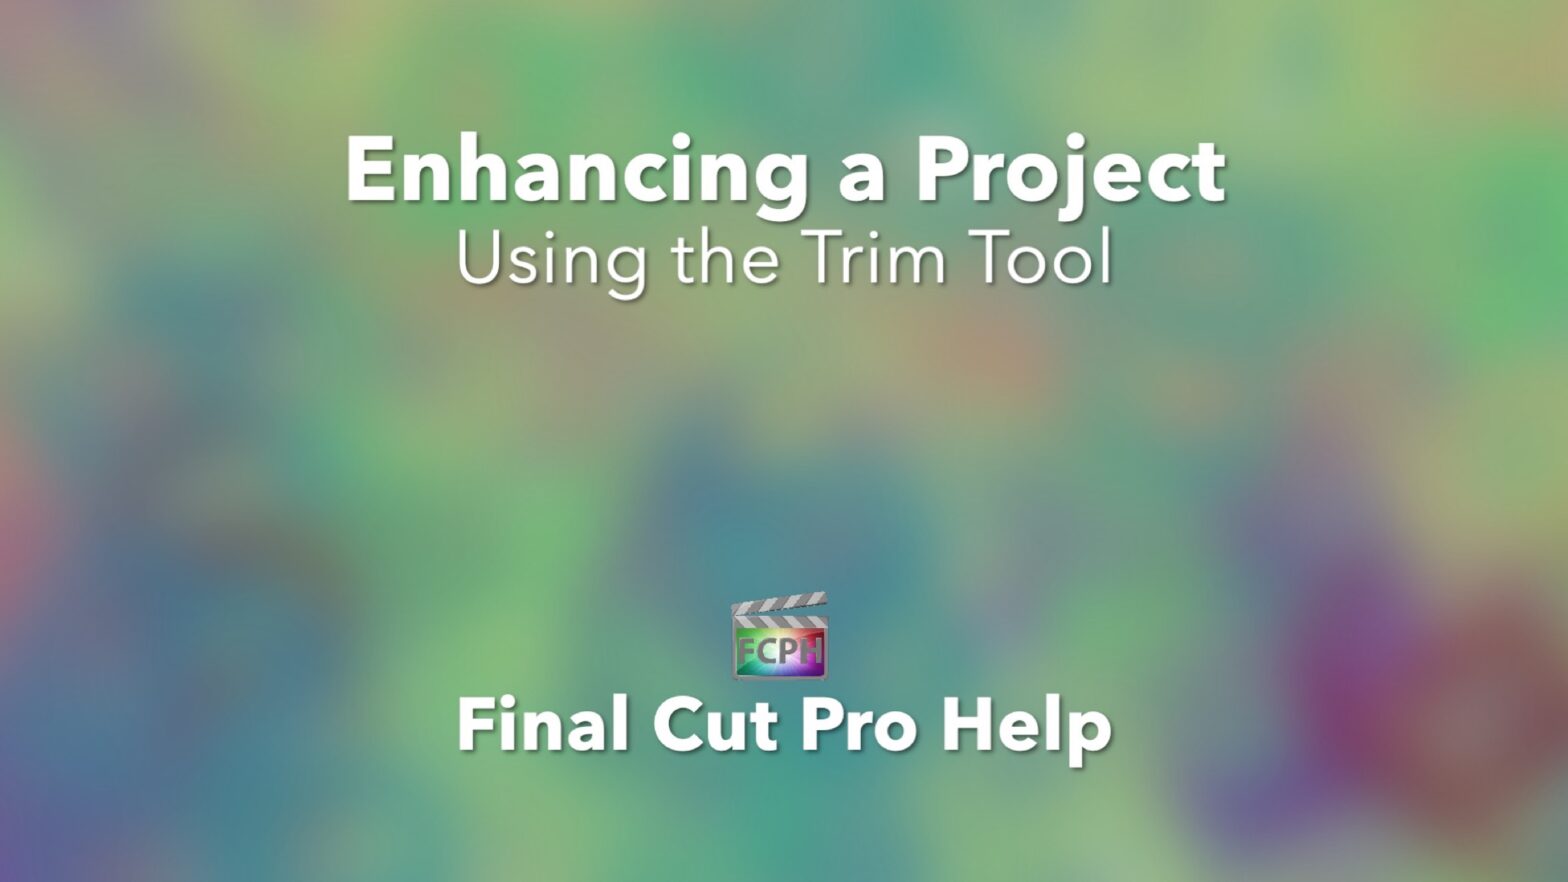 Enhancing a Project Using the Trim Tool